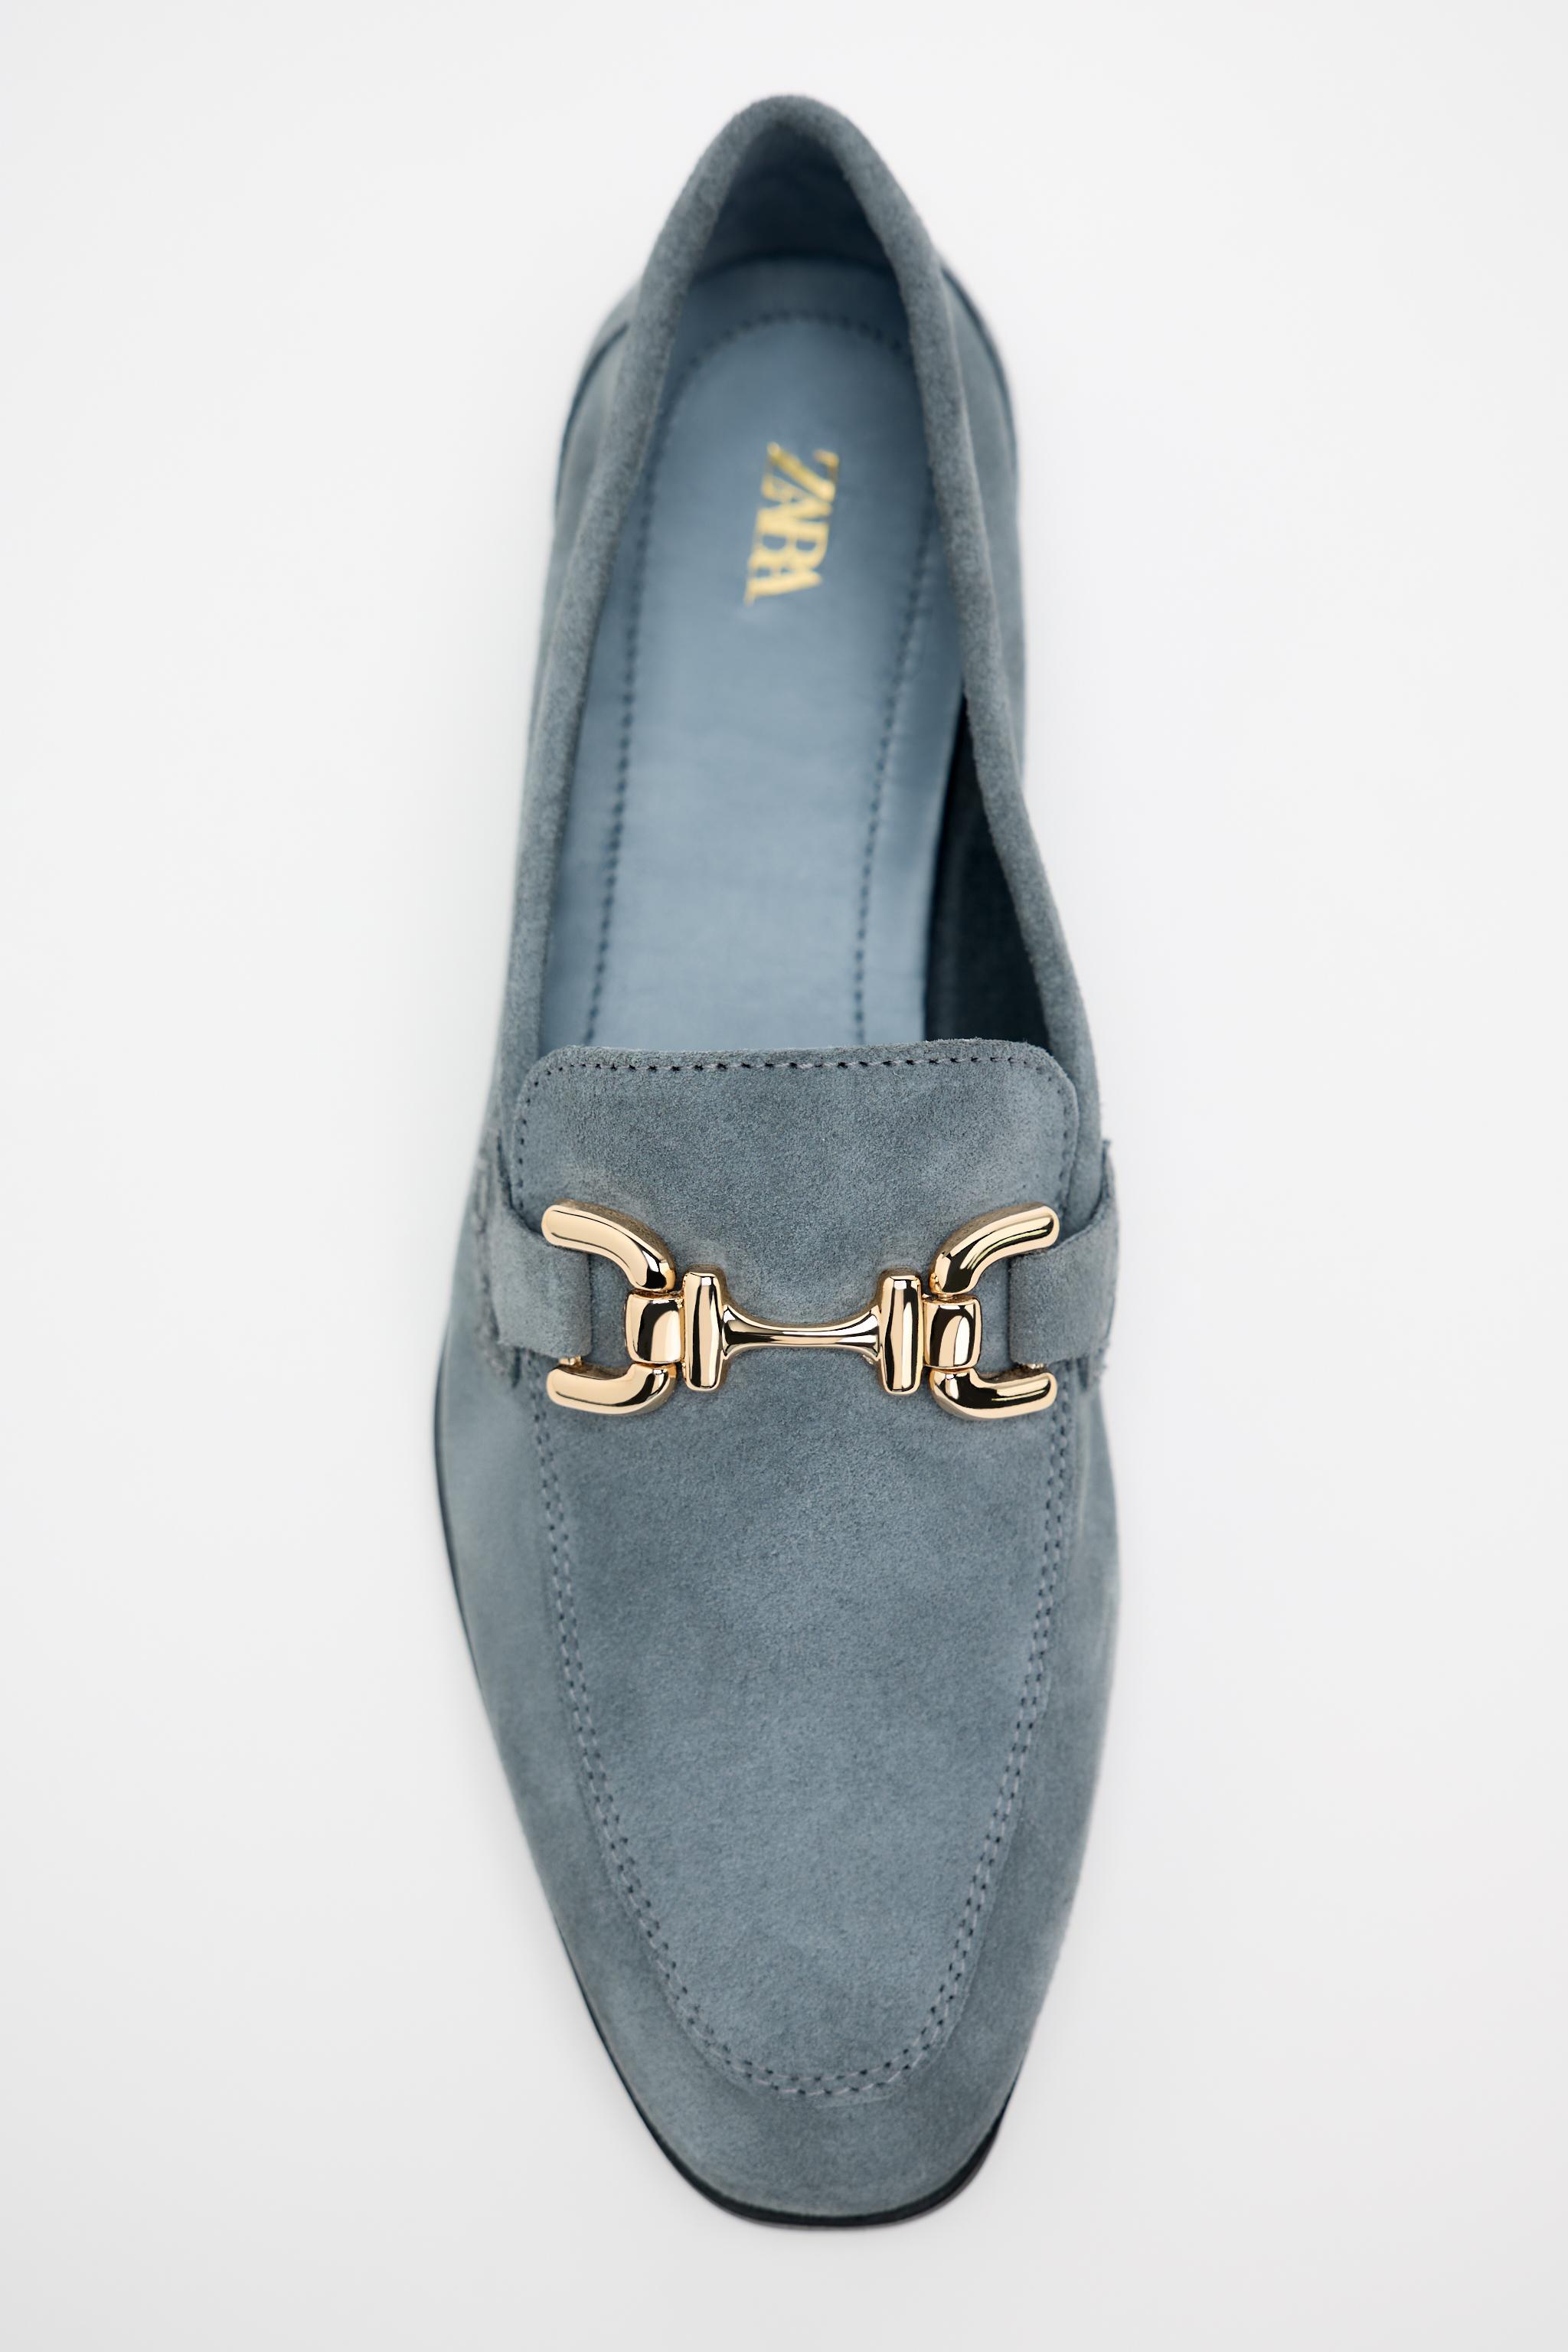 Women's Shoes | ZARA United States - Page 9